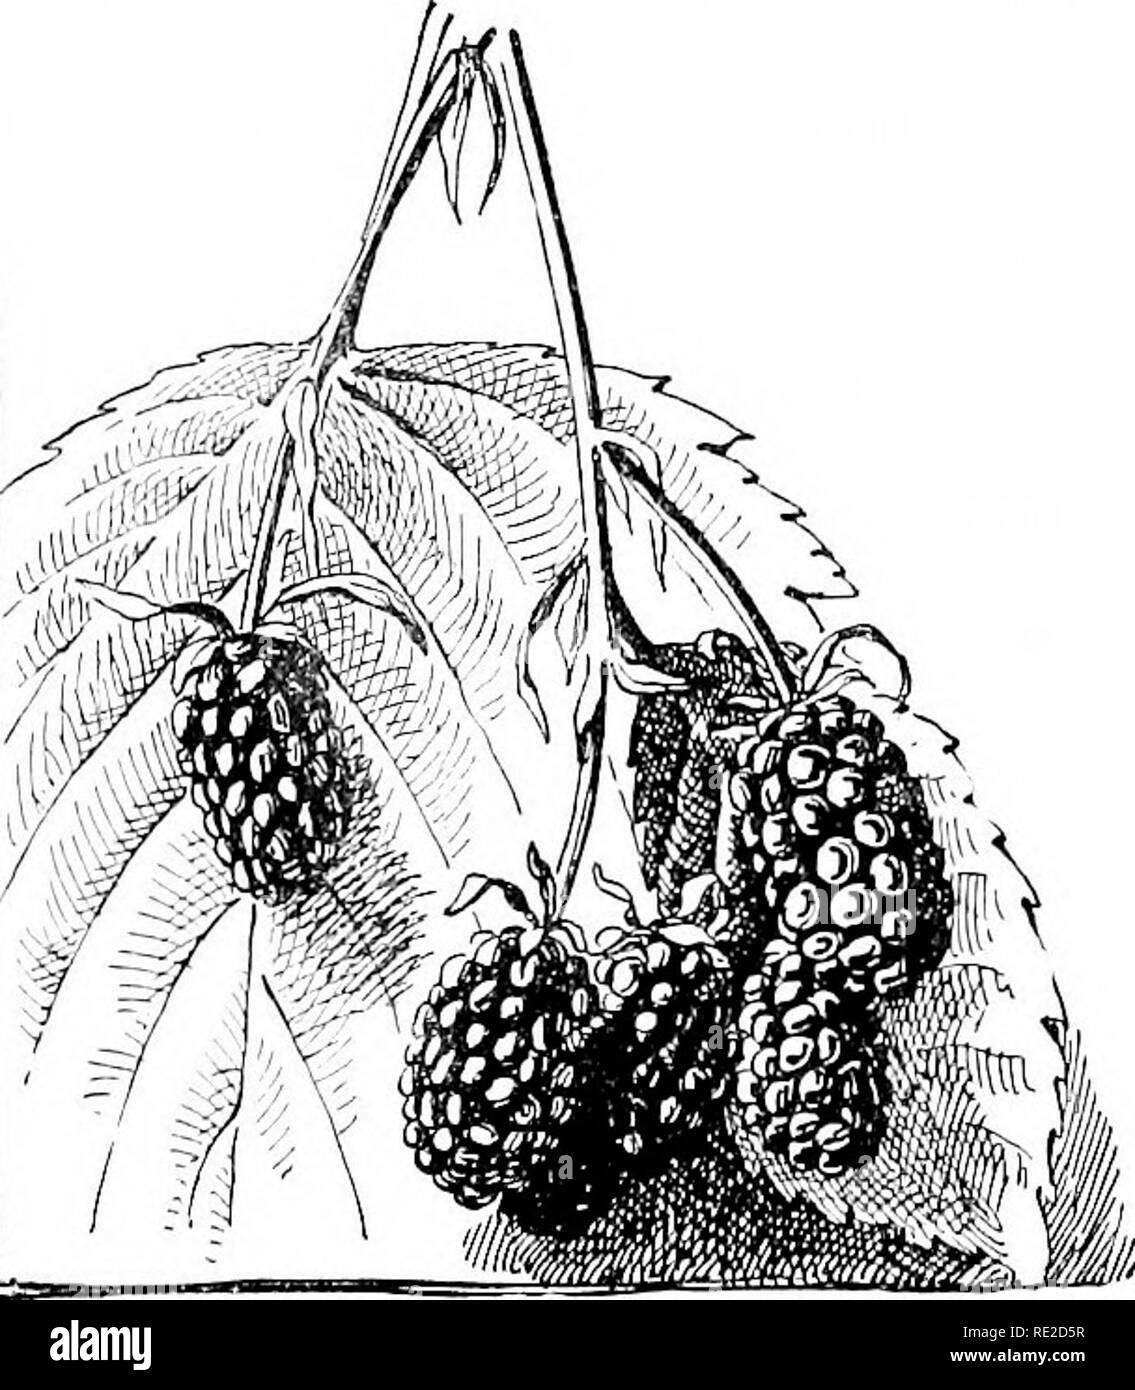 . Cyclopedia of American horticulture, comprising suggestions for cultivation of horticultural plants, descriptions of the species of fruits, vegetables, flowers, and ornamental plants sold in the United States and Canada, together with geographical and biographical sketches. Gardening. 2208. Rubus argutus-The Early Harvest Blackberry. No. 2207. Cultivated lorm of Rubus nigrobaccus. var. sativus. (XK.) No. 22. and flowering shoots of the same plant are preserved in herbaria. Canes very long, usually wholly prostrate (sometimes 10-15 ft.), thickly armed with prickles and sometimes bearing reddi Stock Photo